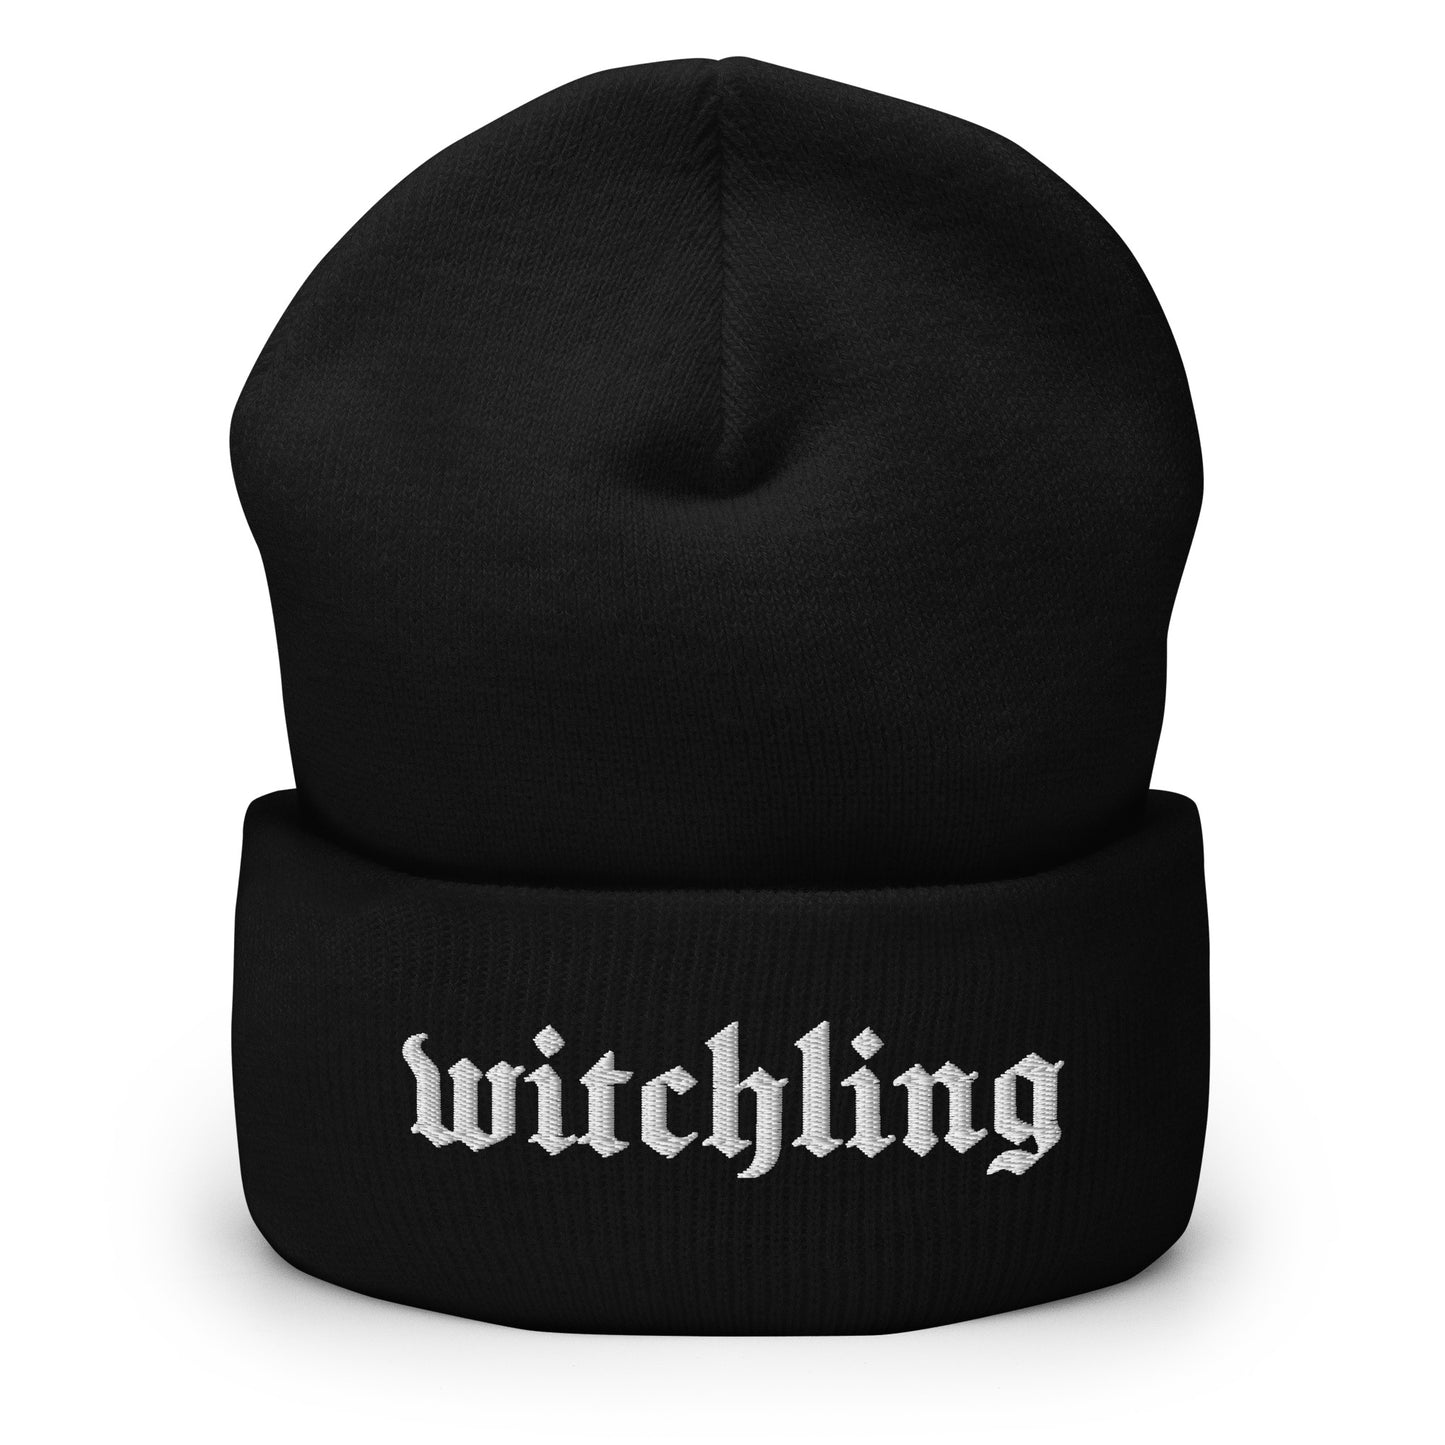 Witchling - Cuffed Beanie